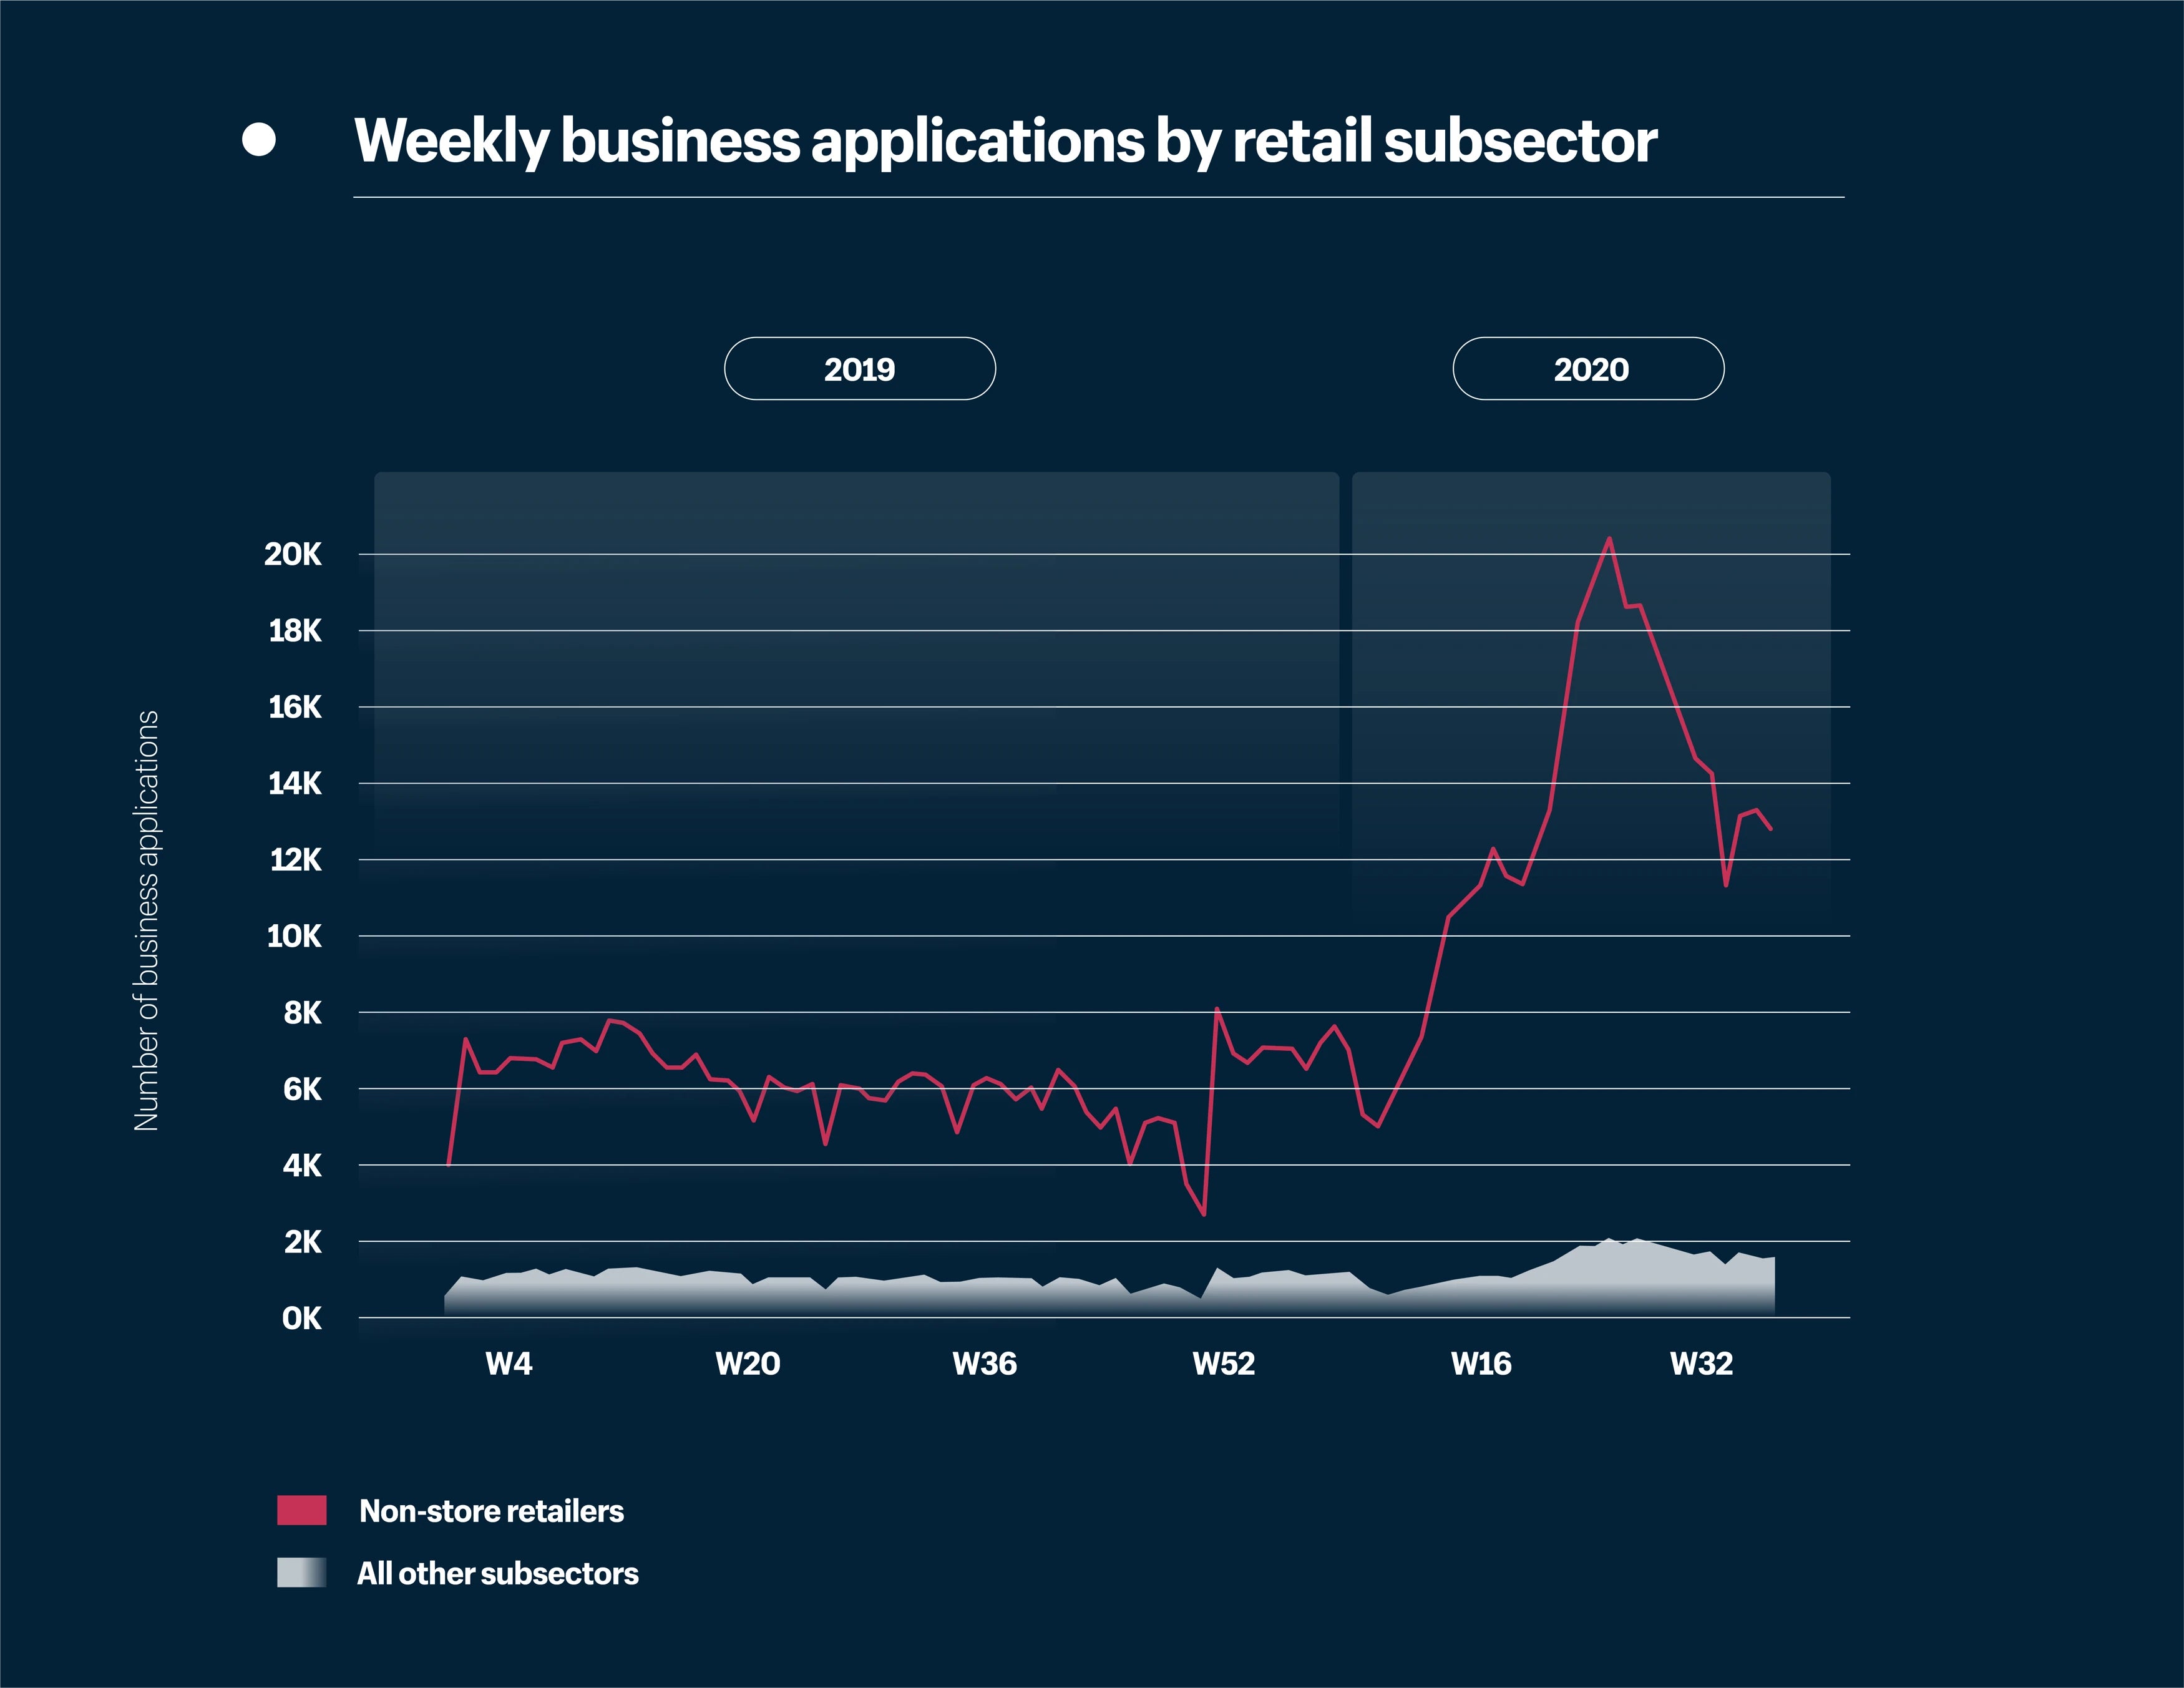 Data visualization showing weekly business applications by retail subsector